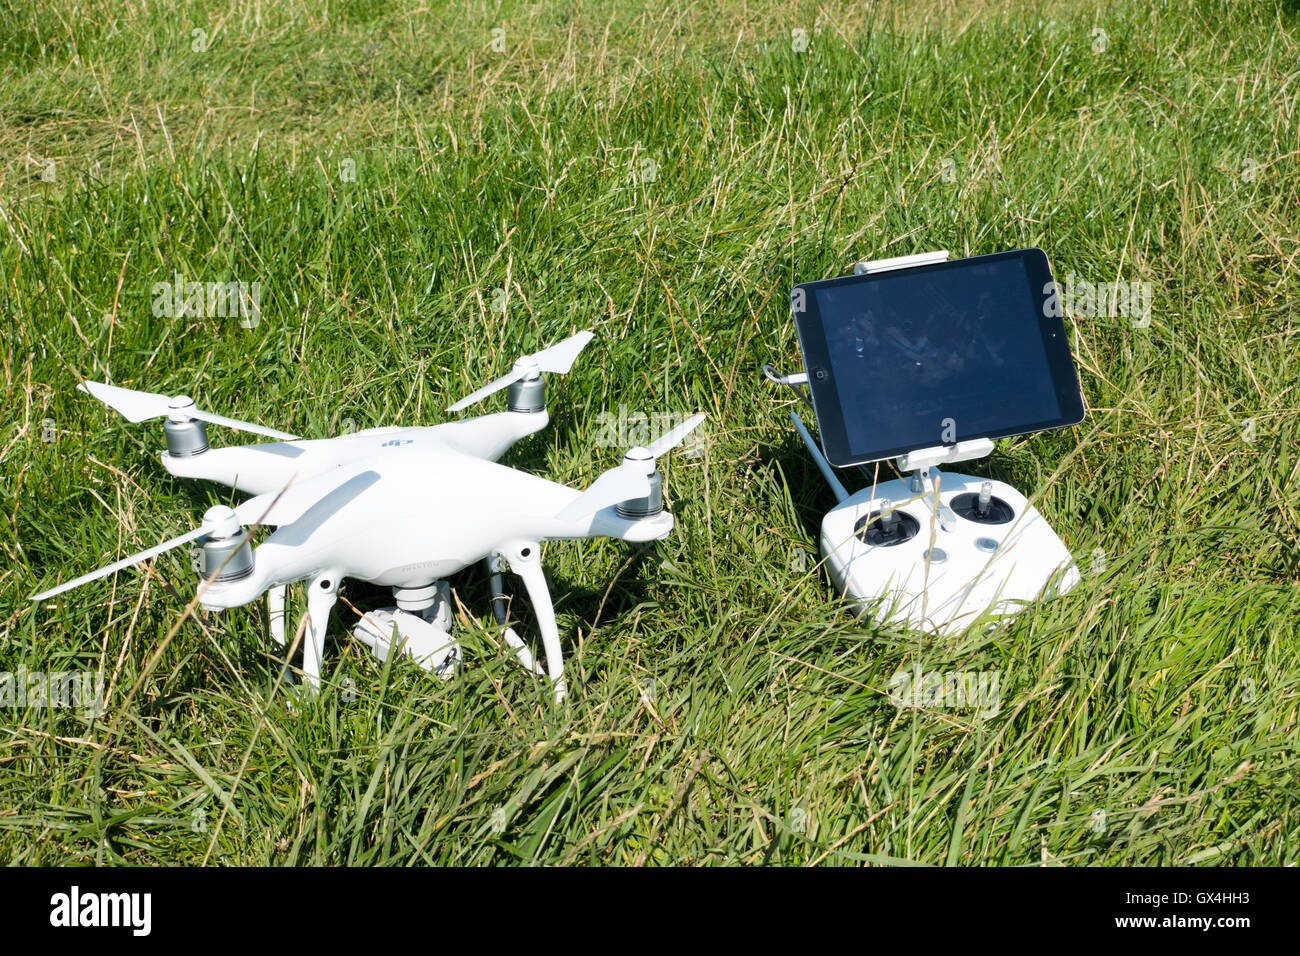 DJI Phantom 4 UAV Drone with controller and tablet Stock Photo